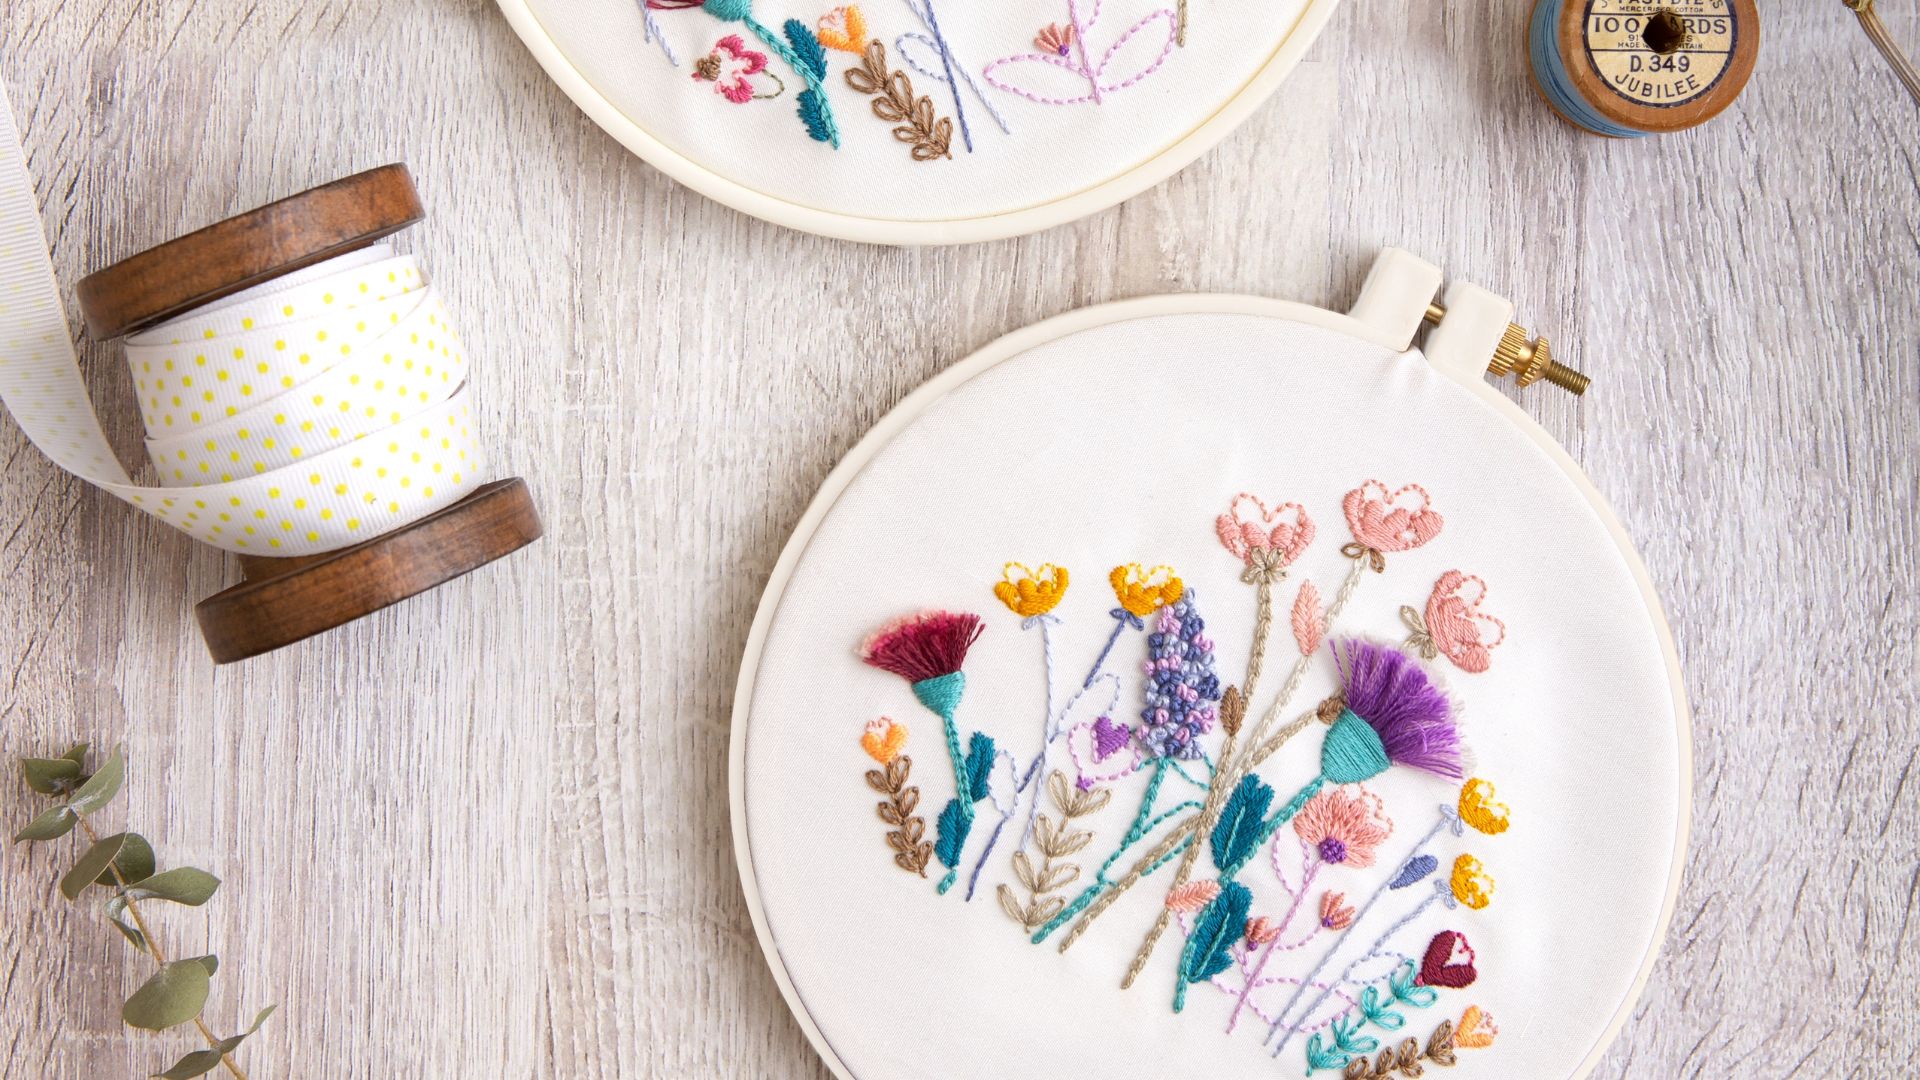 Use a mix of techniques to stitch your own floral embroidery masterpiece